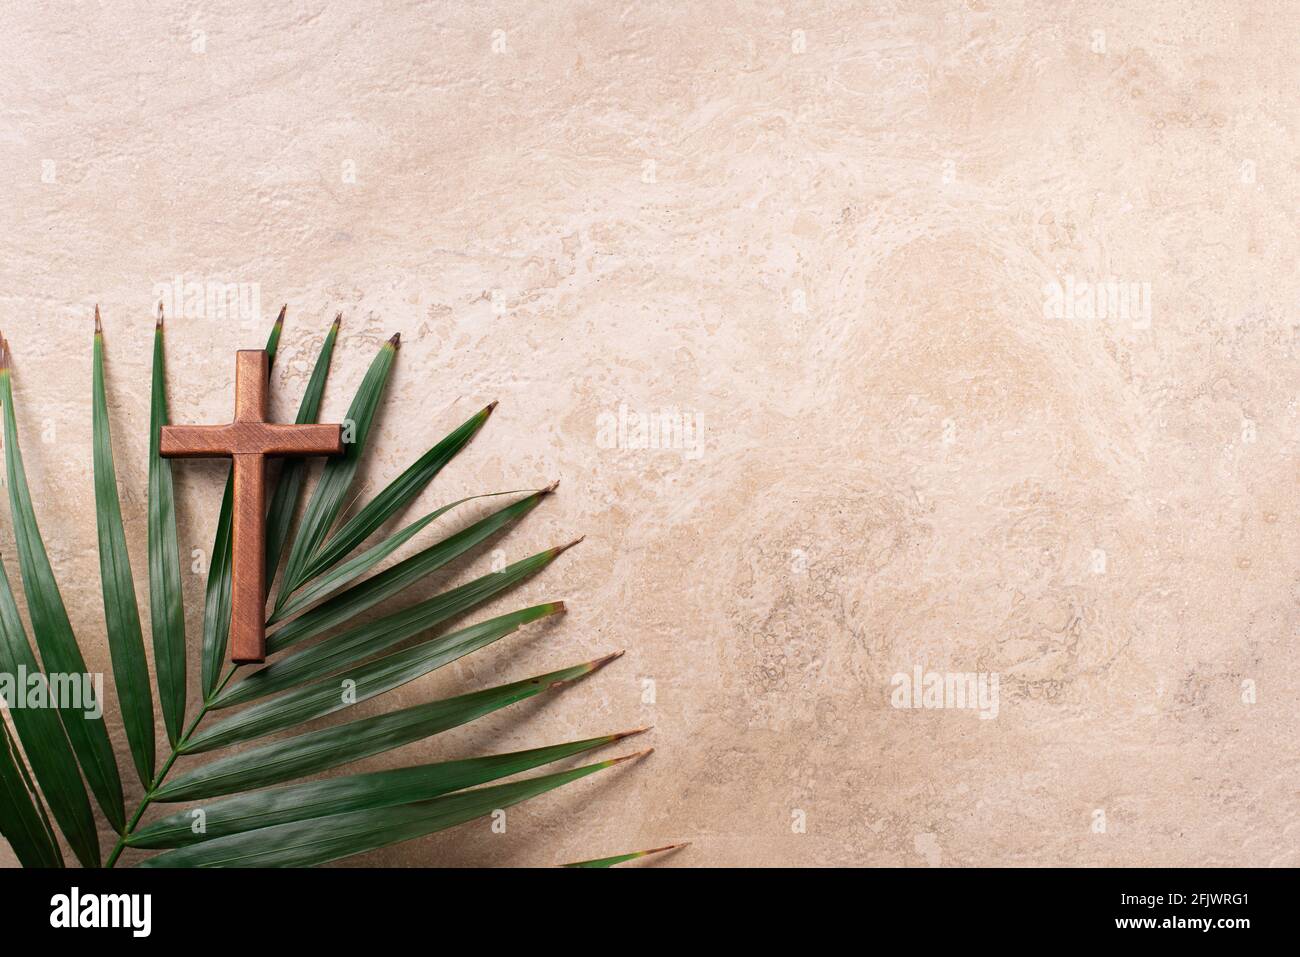 Palm Sunday concept. Wooden cross over palm leaves. Reminder of Jesus sacrifice and Christ resurrection. Easter passover. Eucharist concept Stock Photo